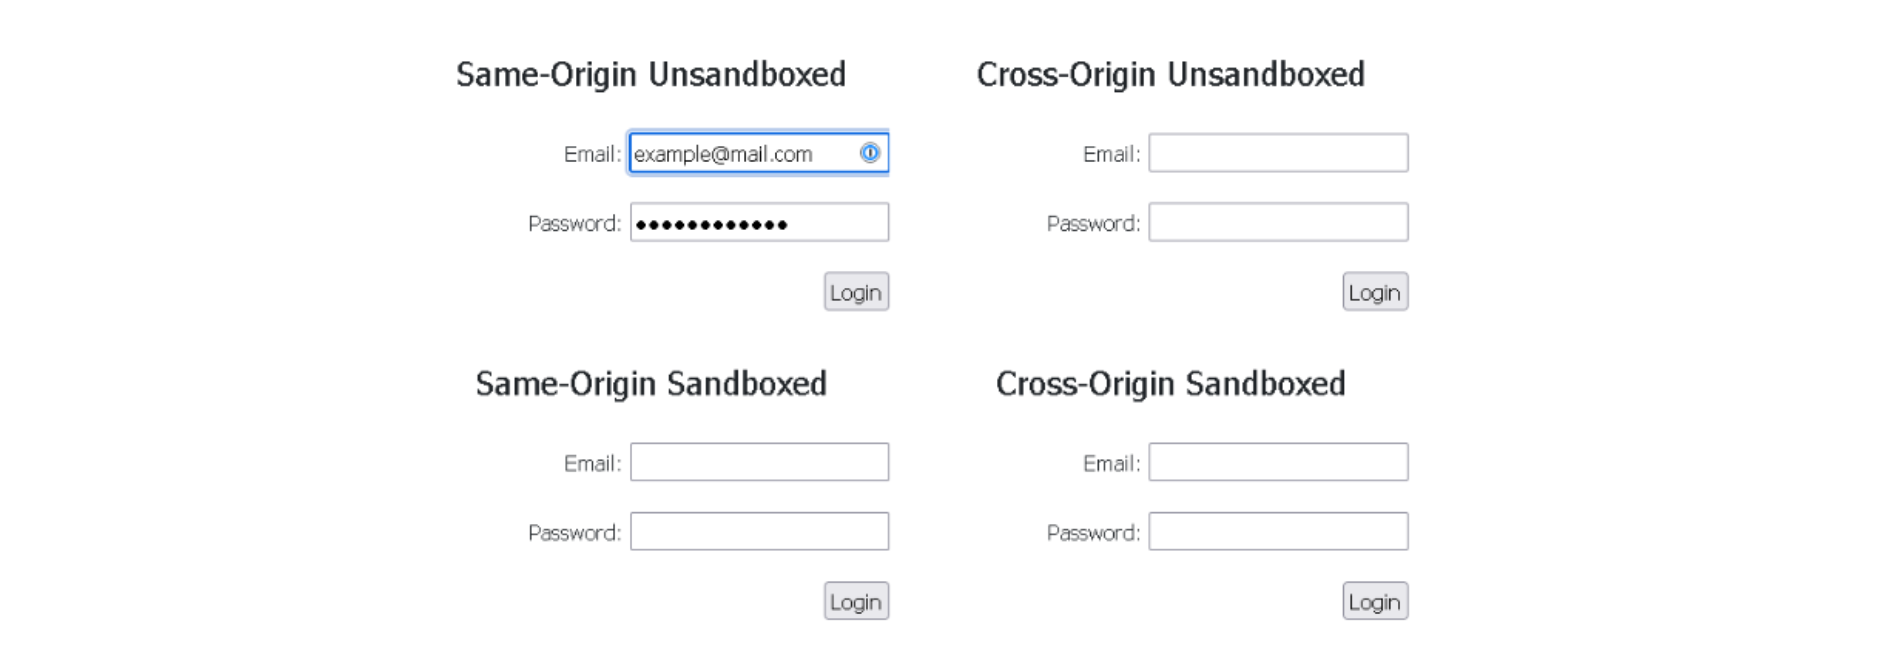 1Password-extension-only-auto-fills-the-same-origin-unsandboxed-iFrame